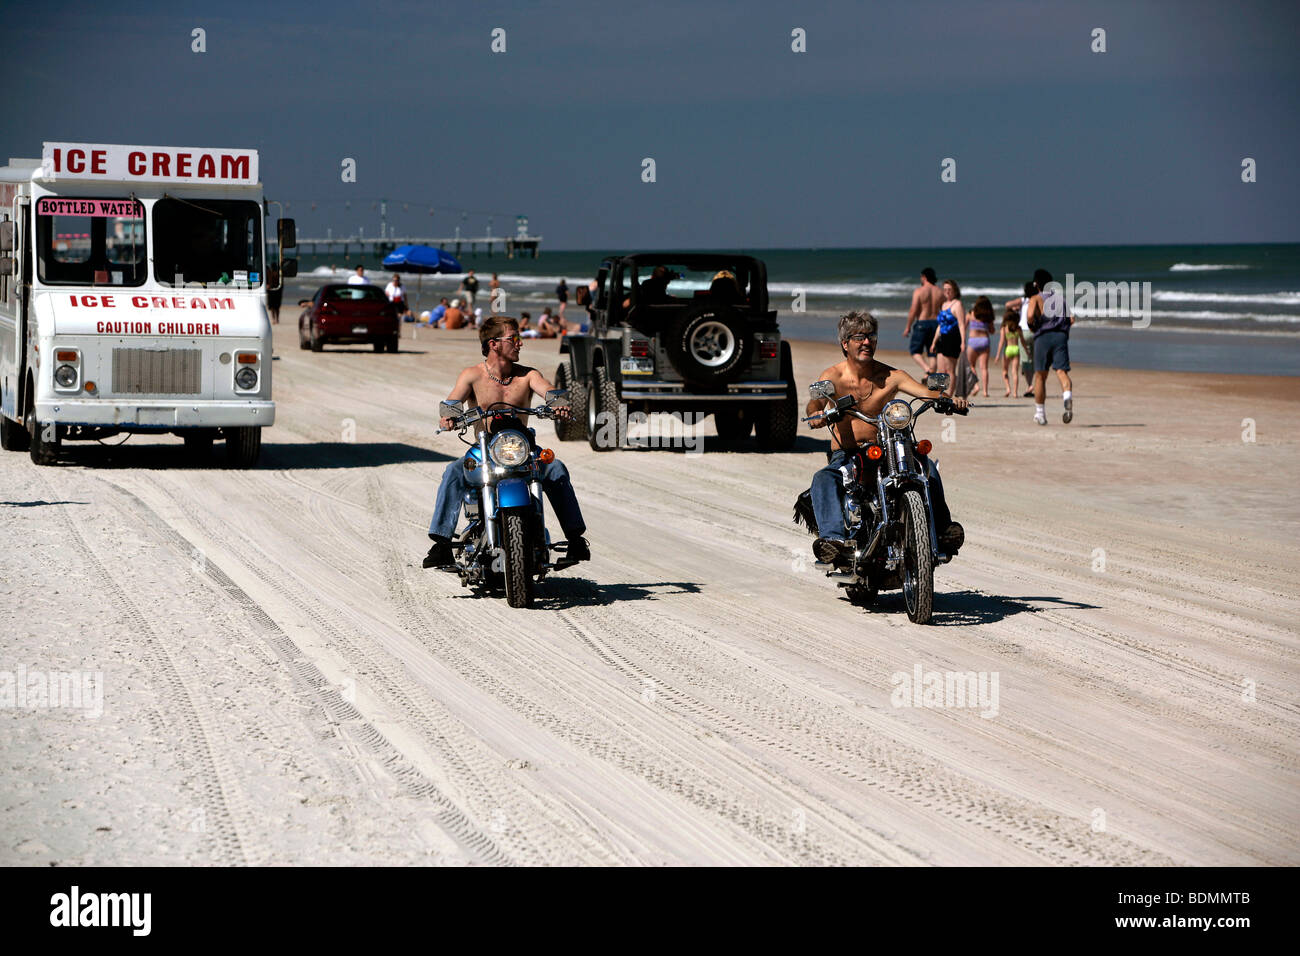 Motorcyclists and car of an ice-cream seller on the beach of Daytona, Florida, USA, North America Stock Photo